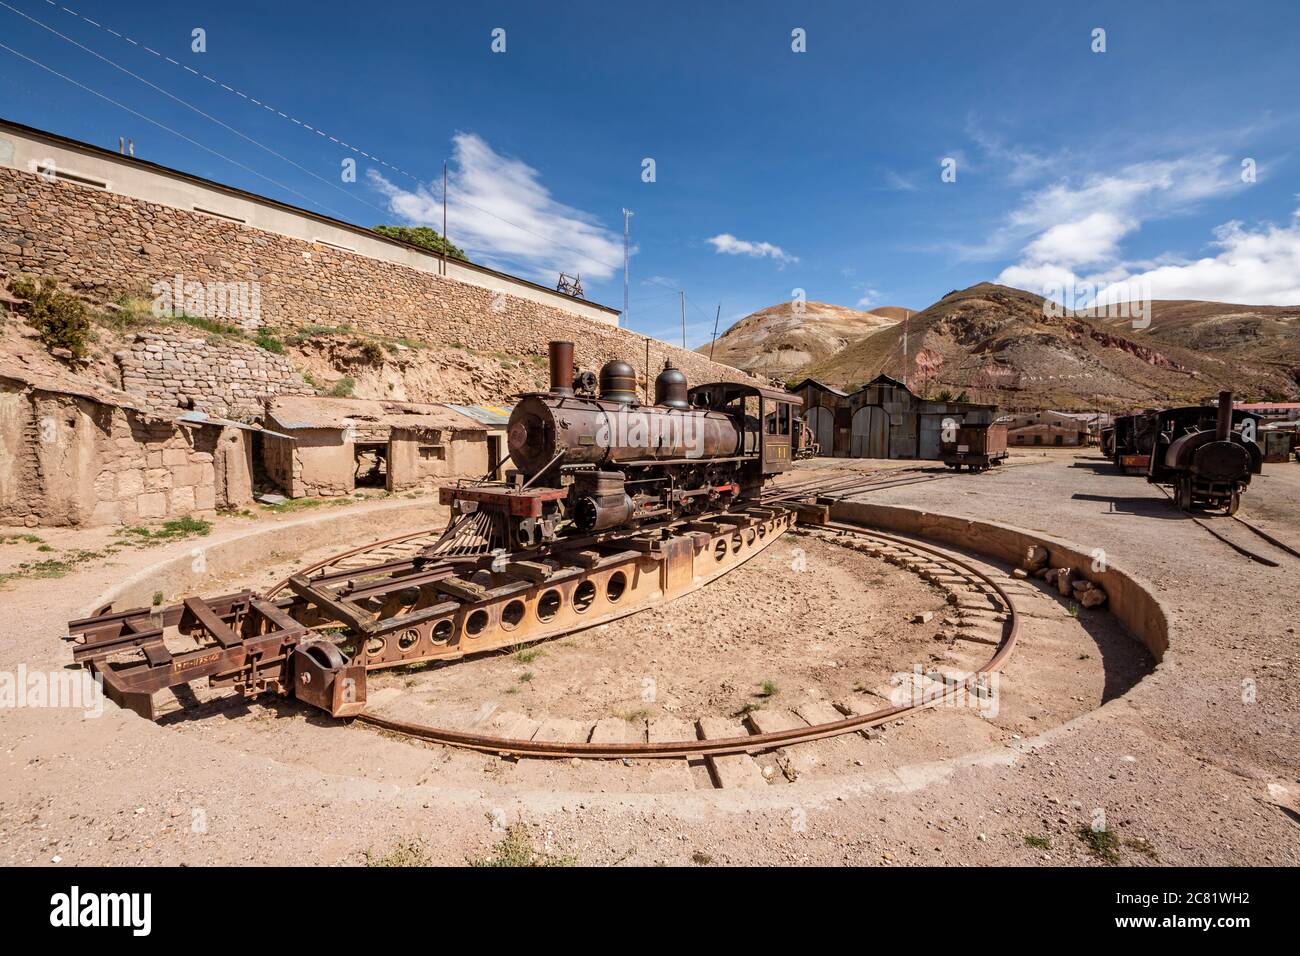 Rogers locomotive 5544, built in 1900, on a turntable; Pulacayo, Potosi Department, Bolivia Stock Photo